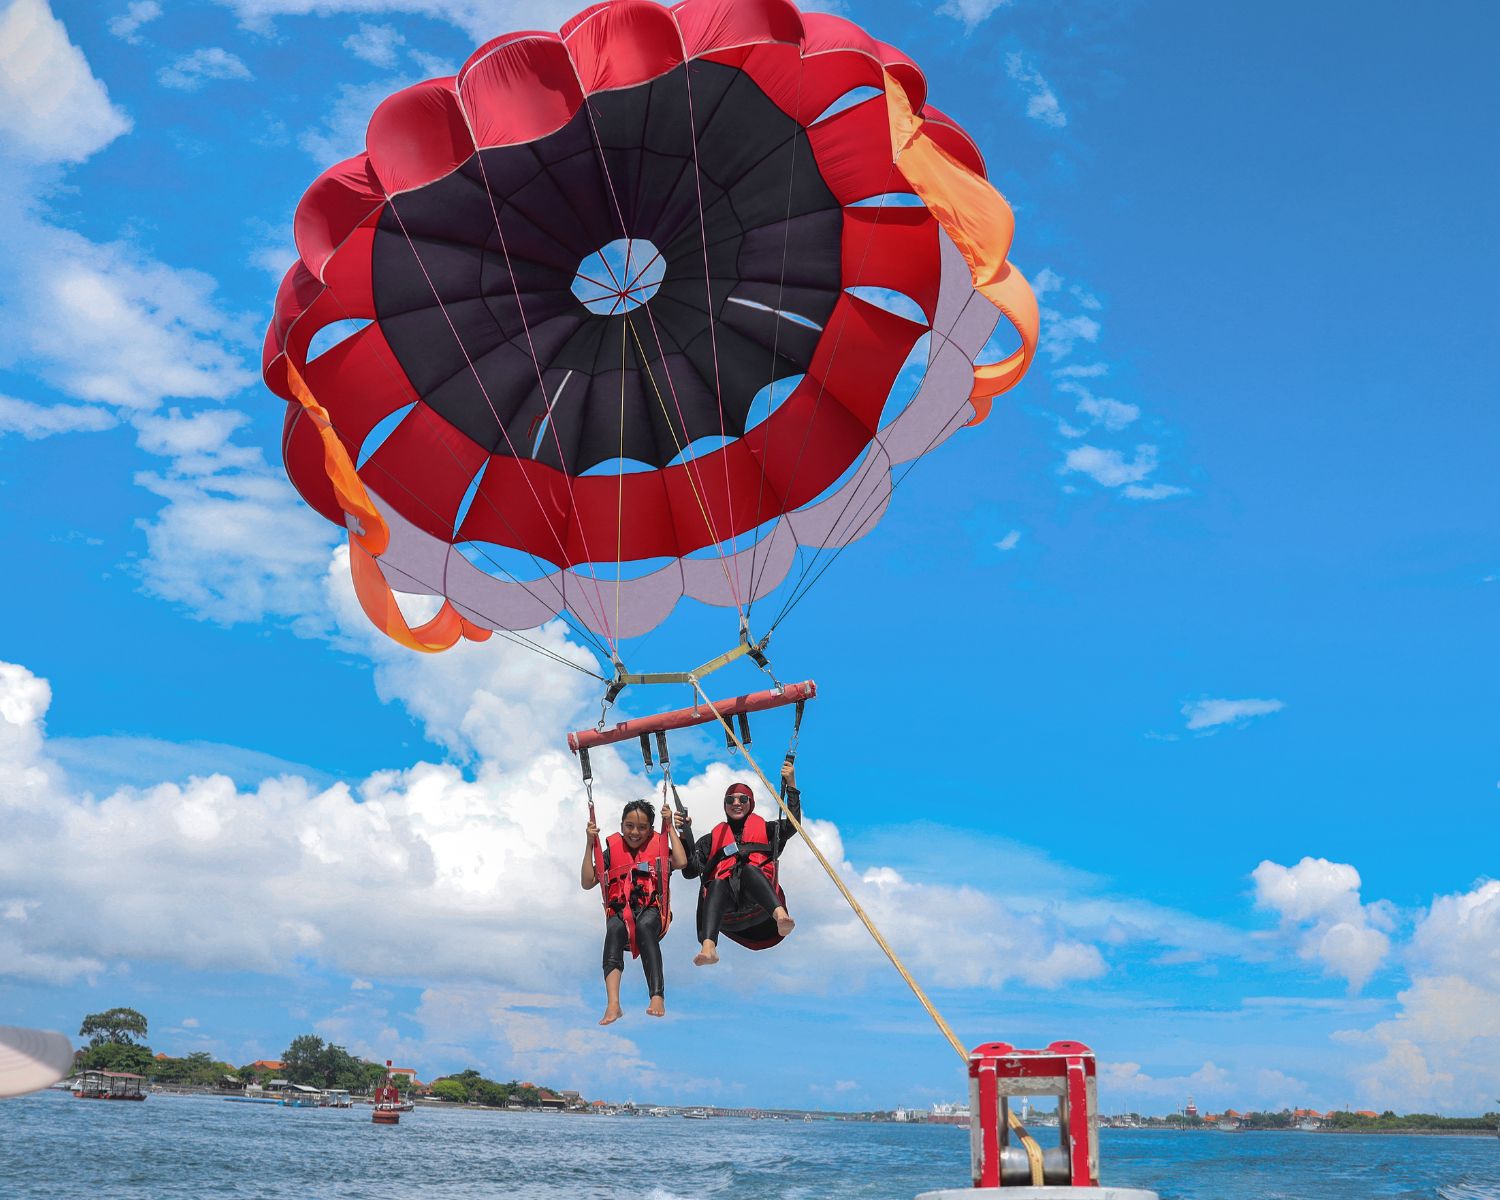 Two persons parasailing